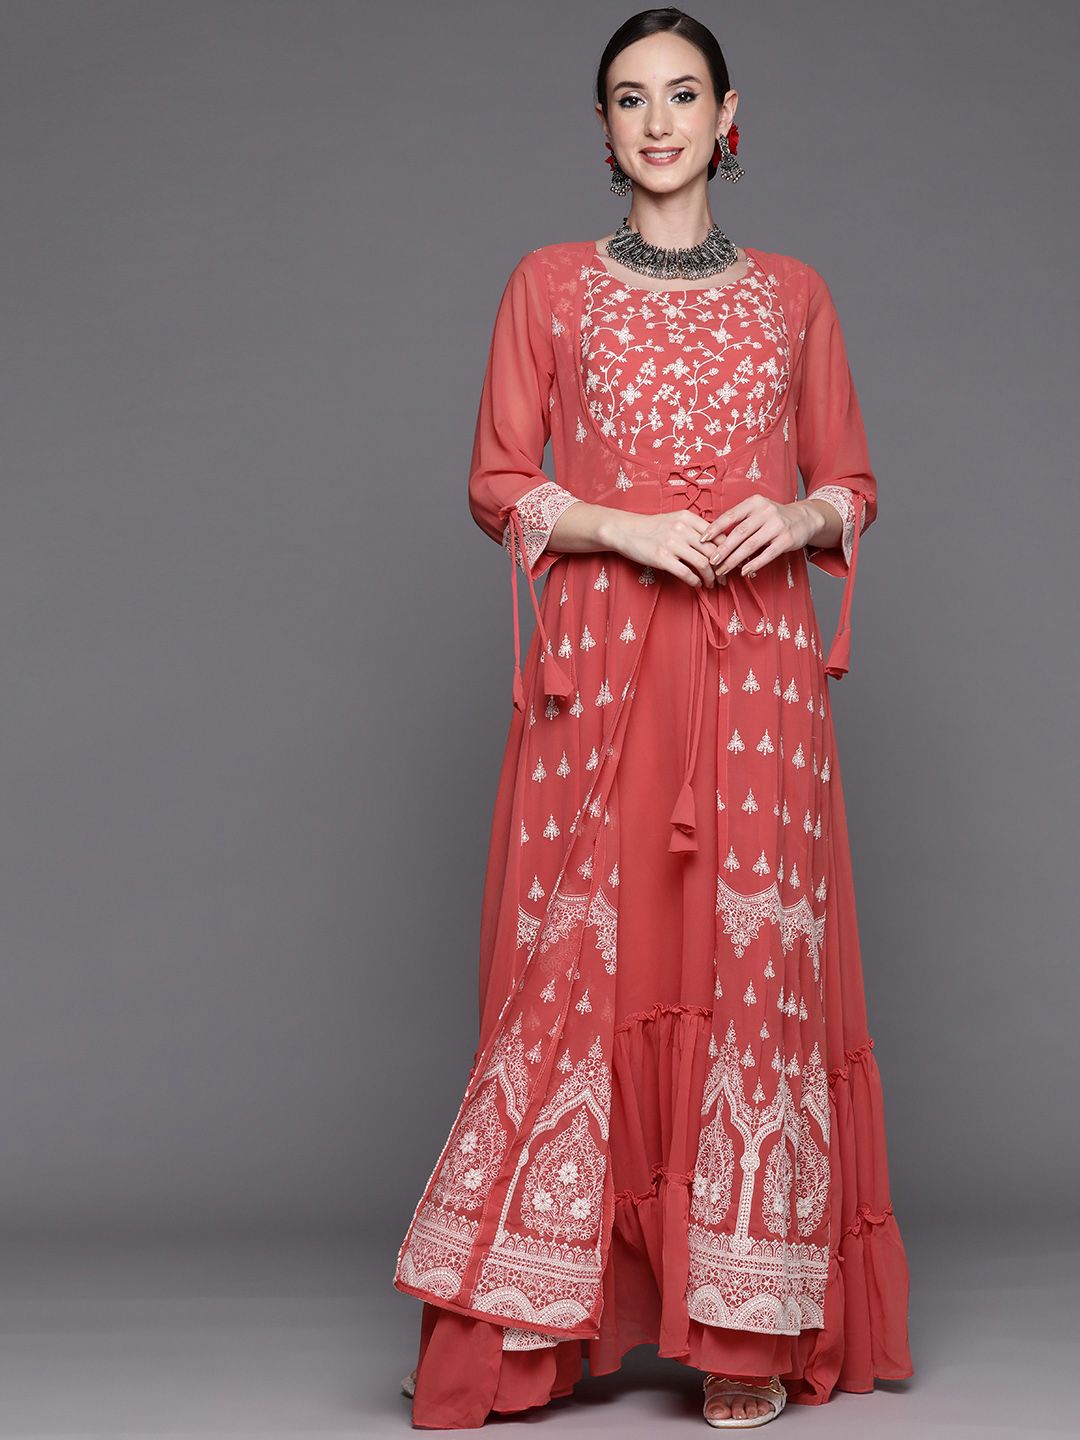 Indo Era Women Red & White Ethnic Motifs Embroidered Georgette A-Line Maxi Dress Price in India